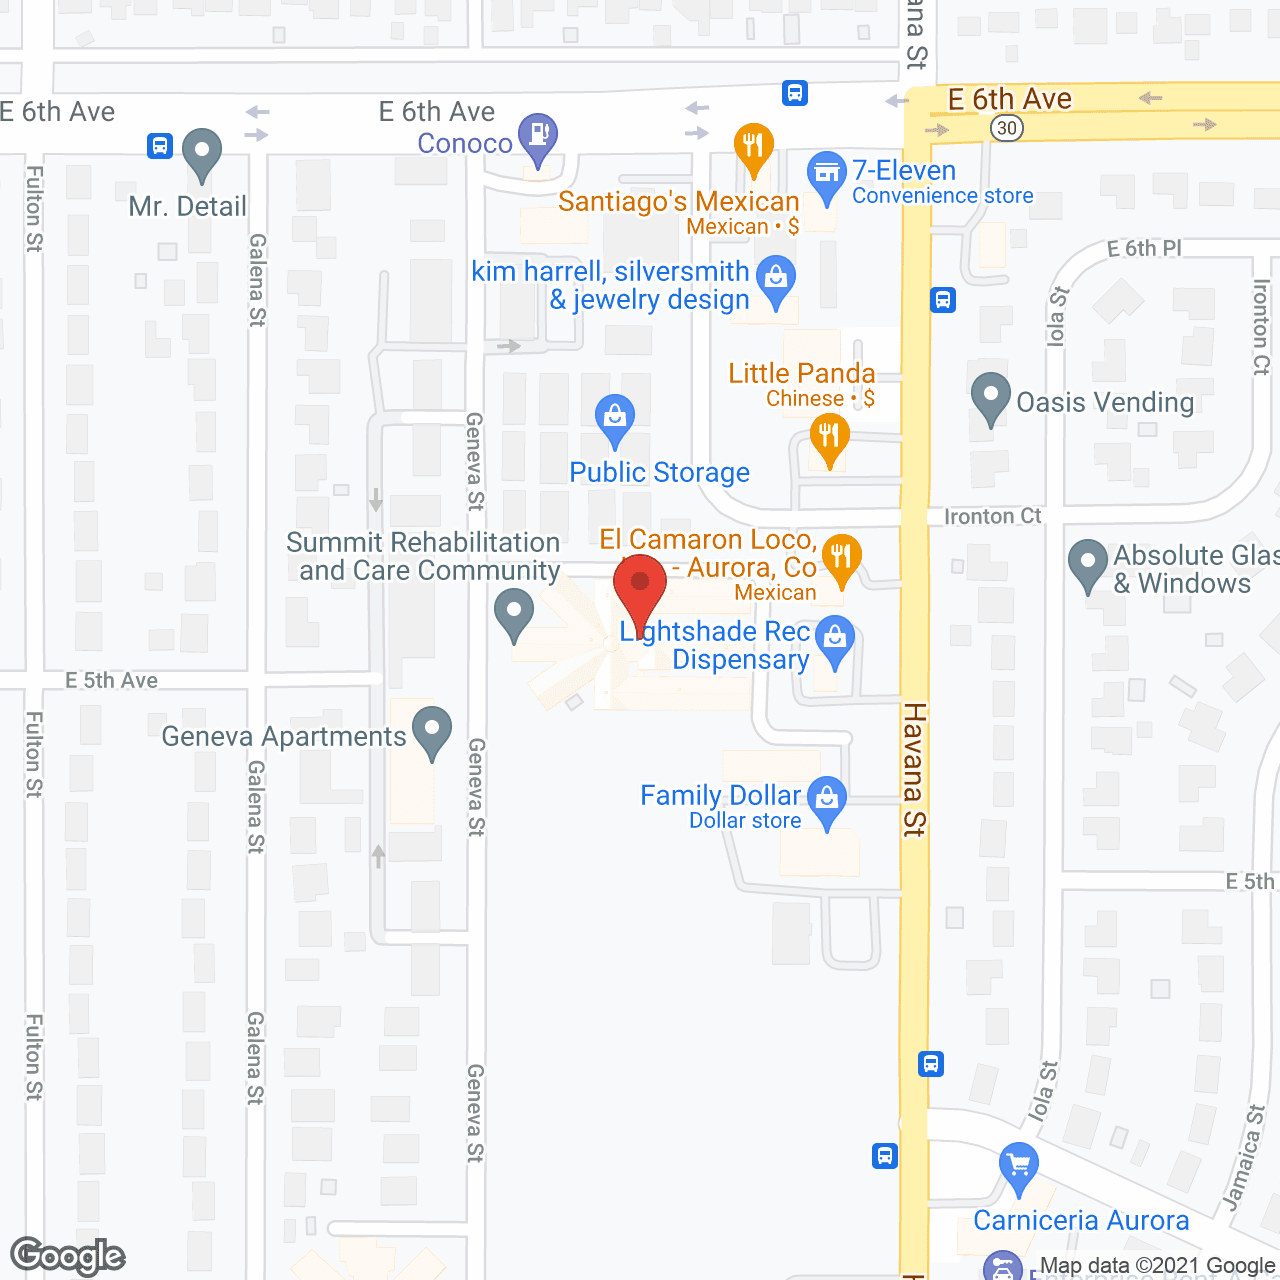 Summit Rehabiliation and Care Community in google map